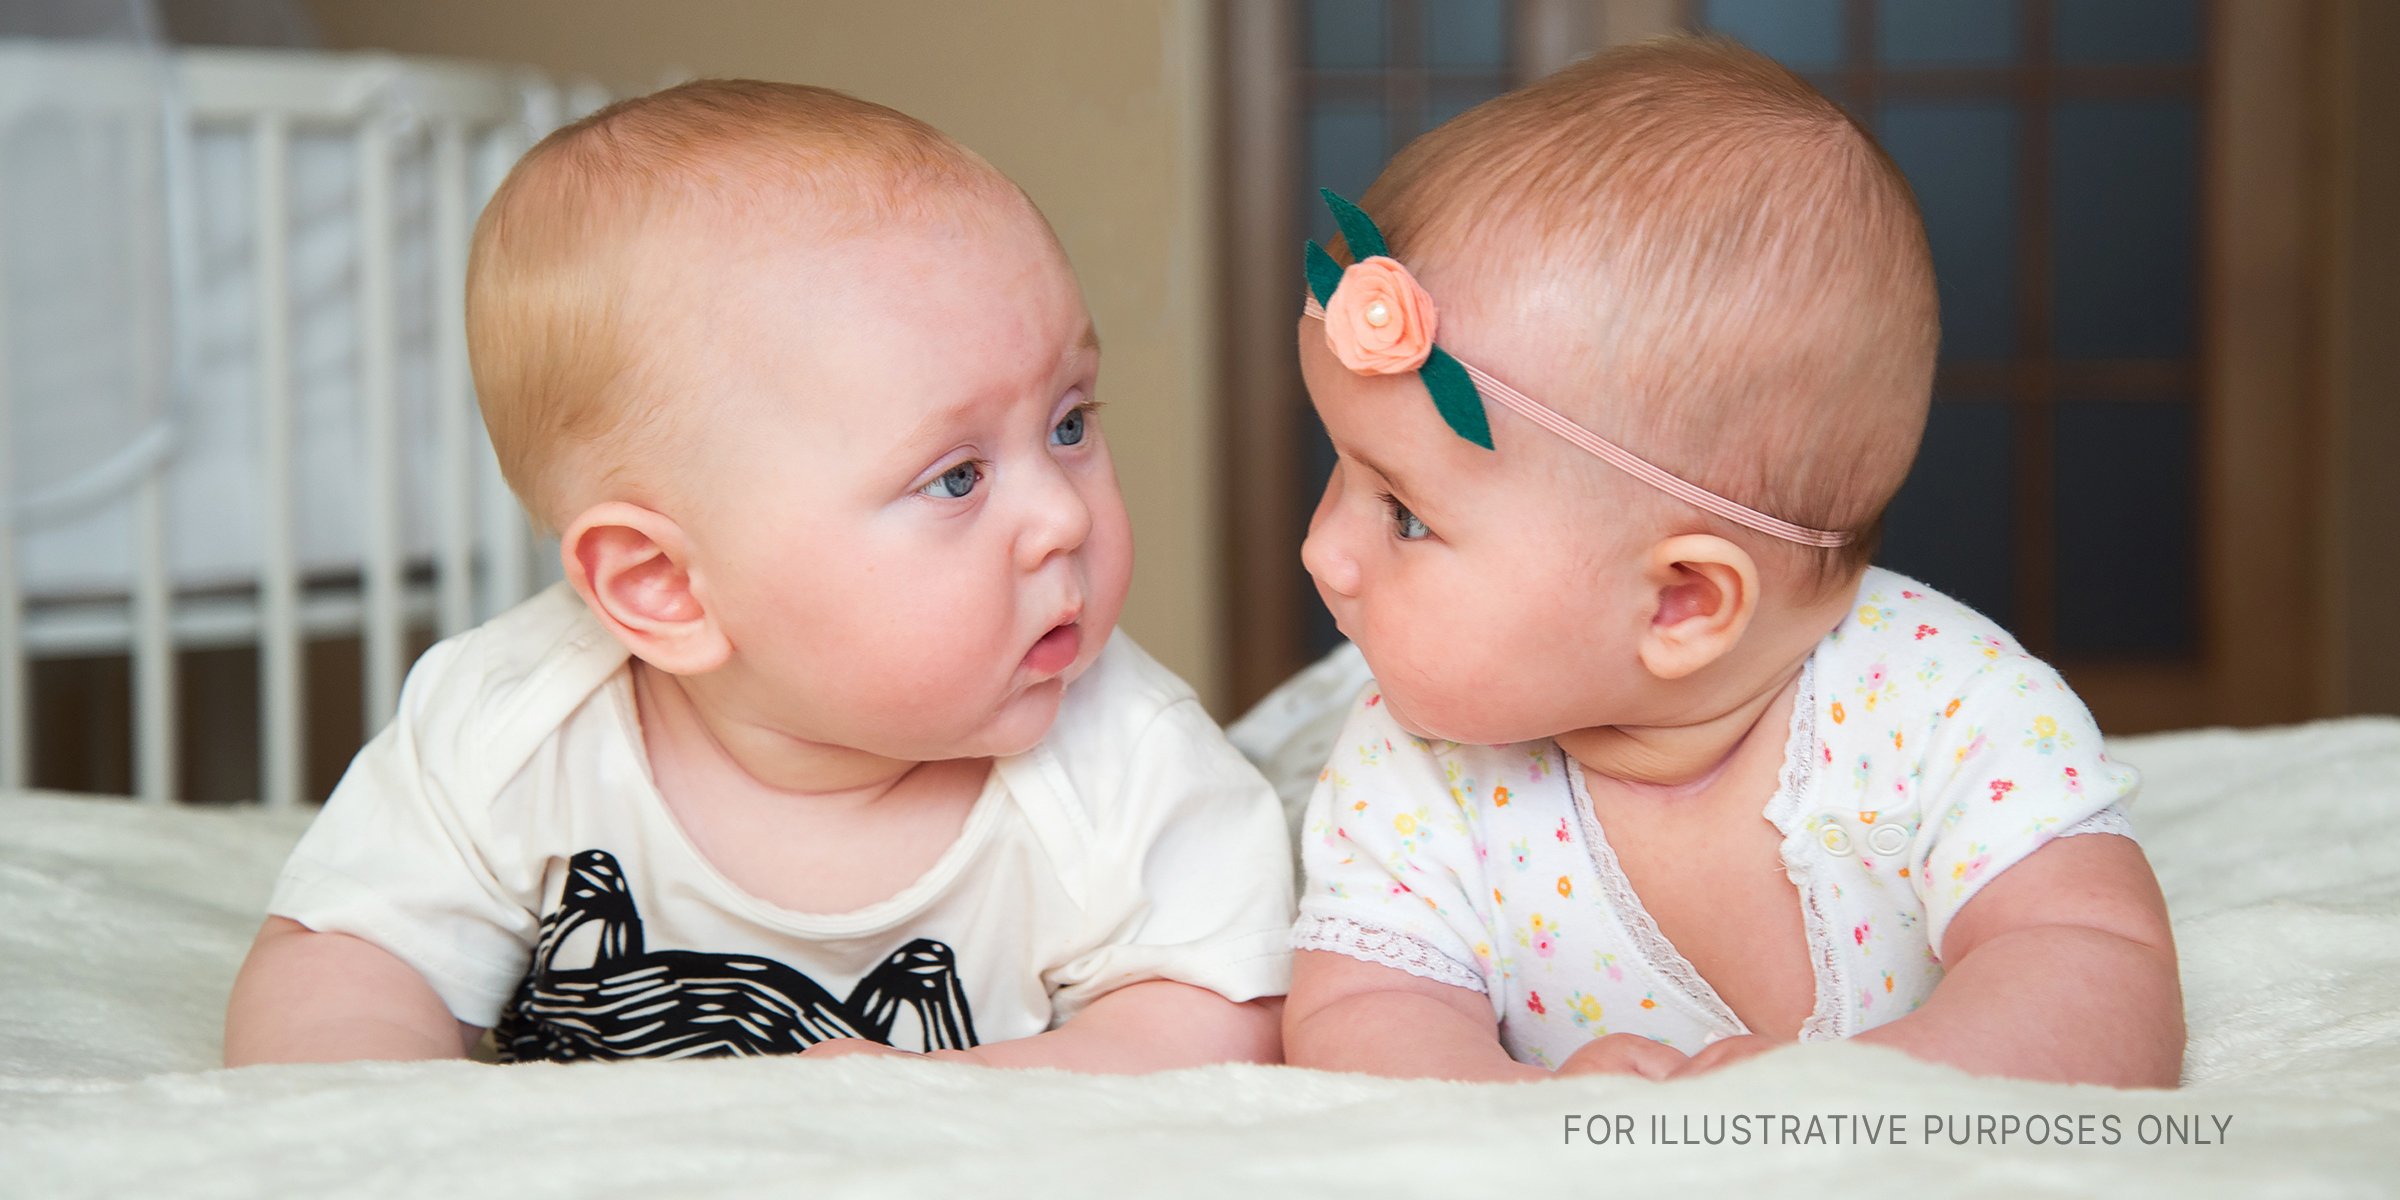 Two babies on a bed. | Source: Shutterstock